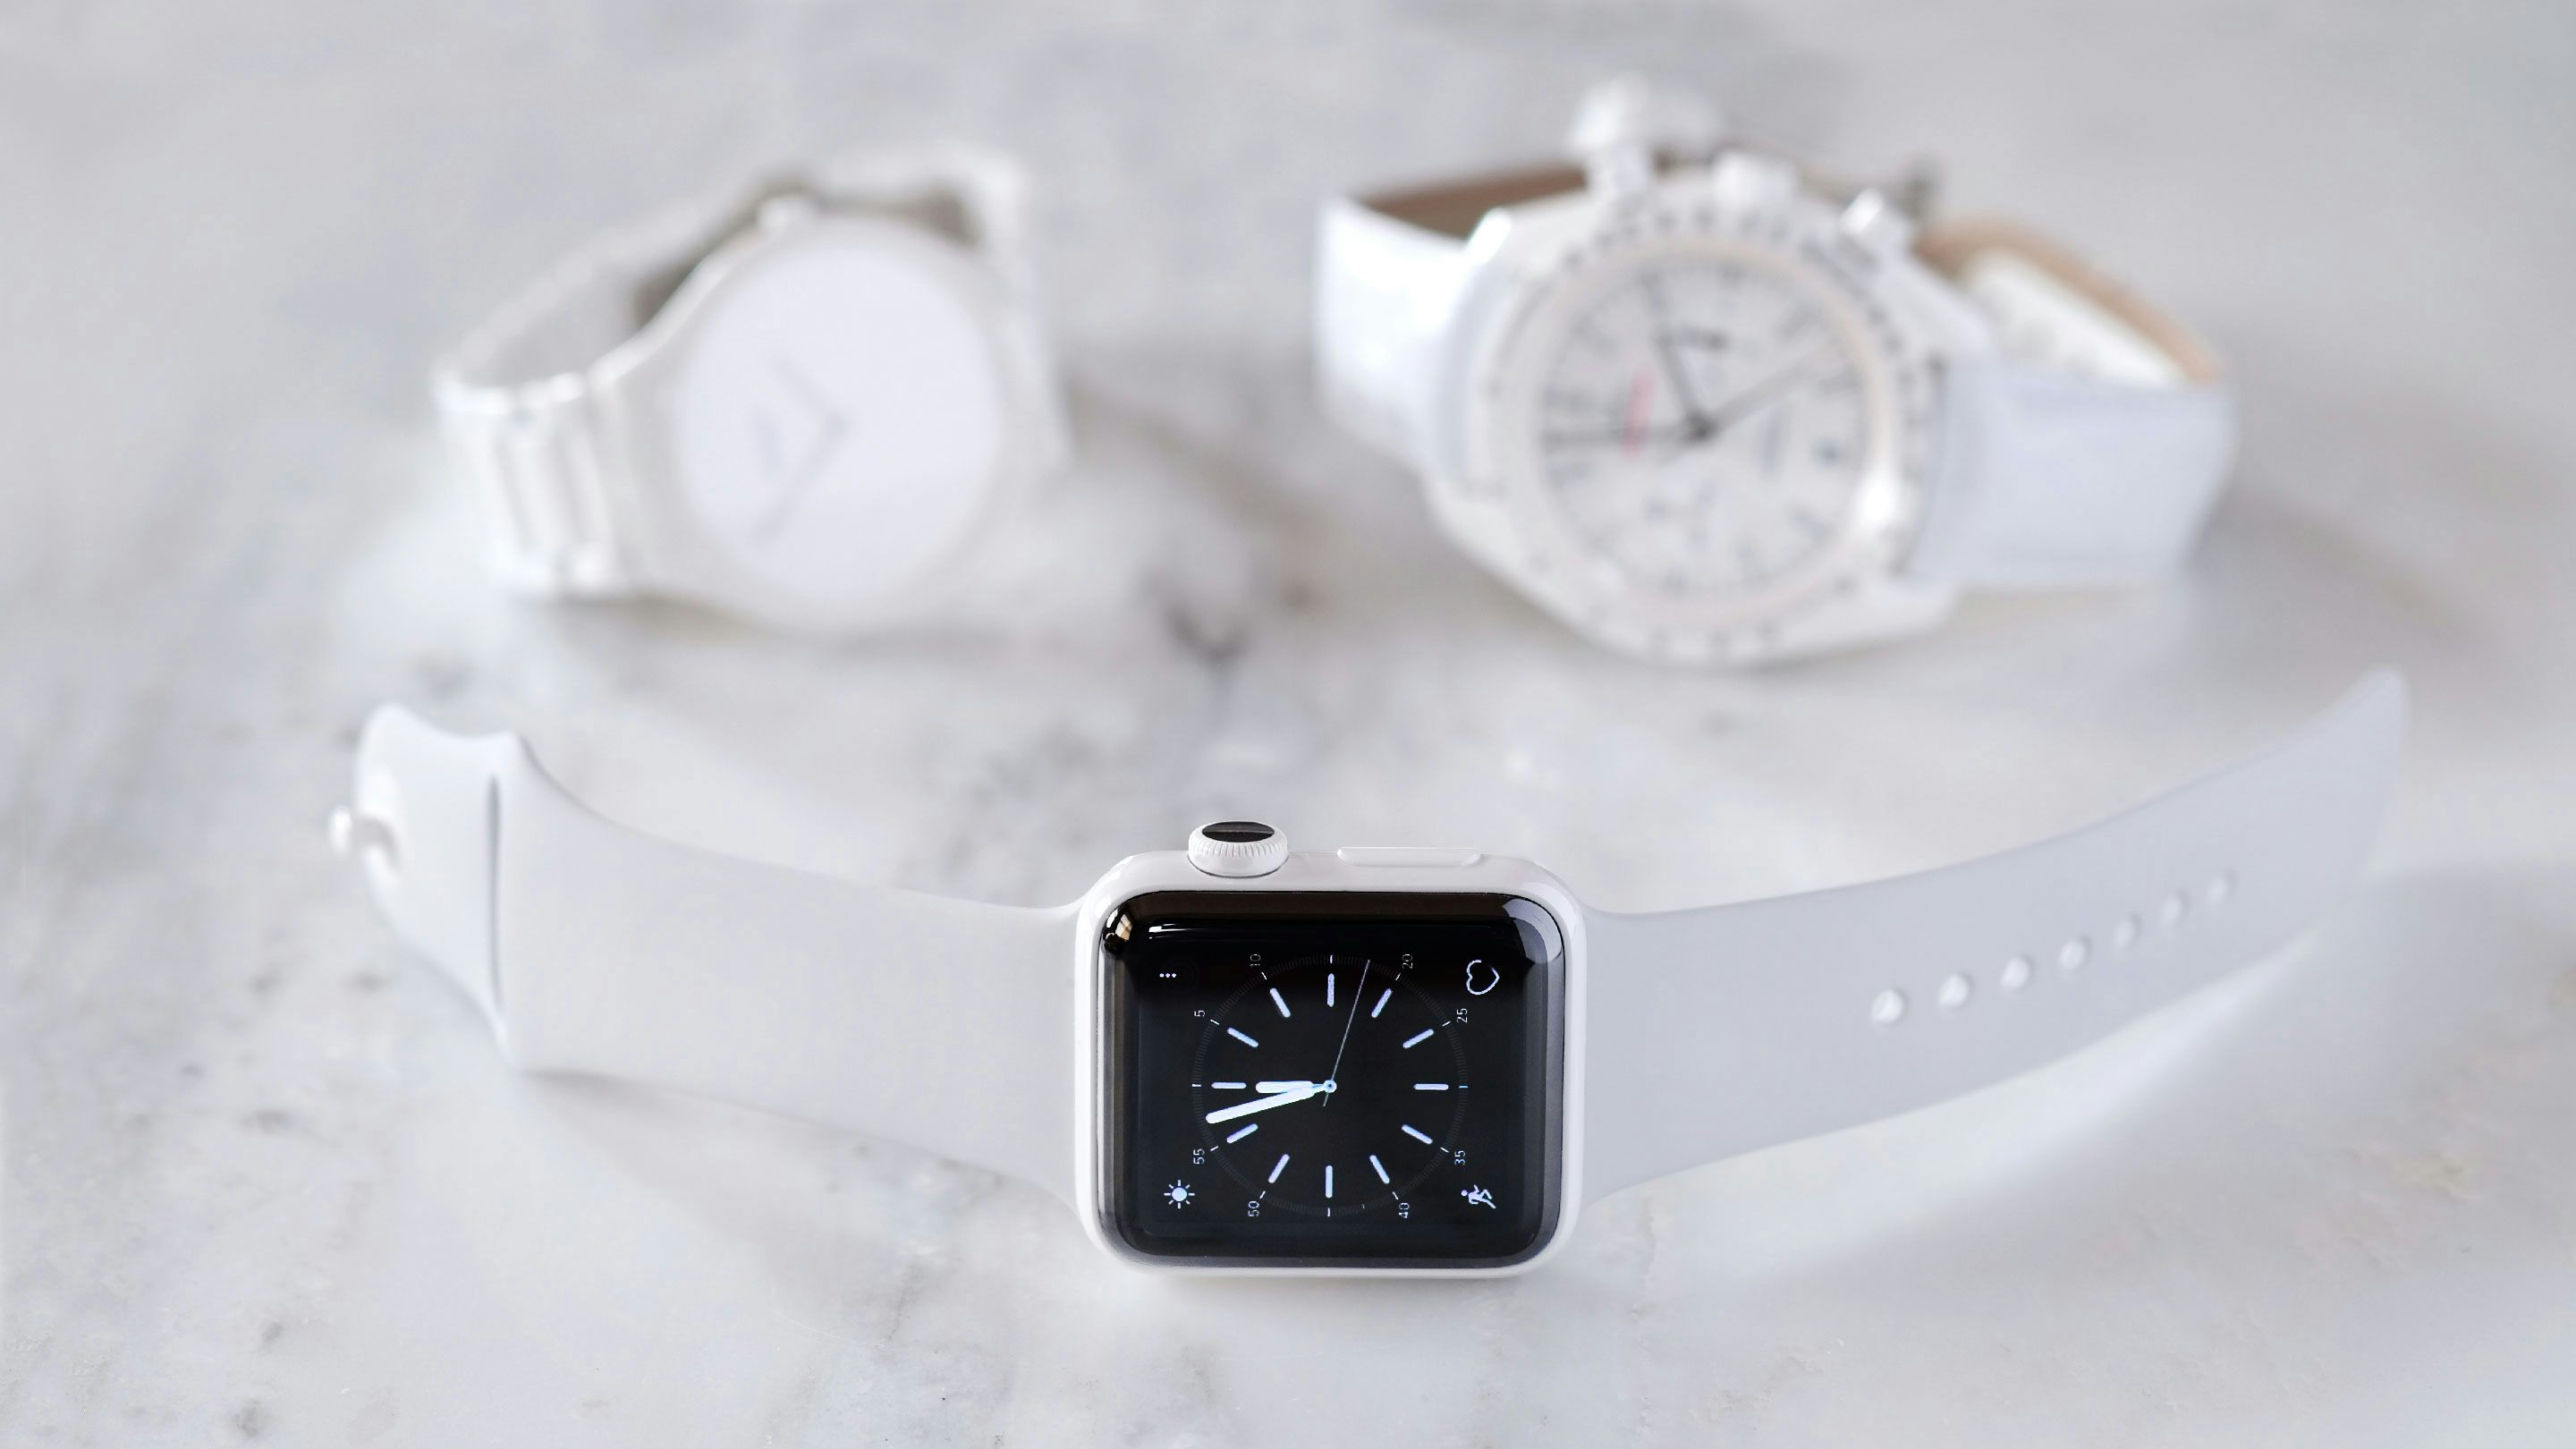 Hands On The White Ceramic Apple Watch Edition And Some White Ceramic Watch History Hodinkee